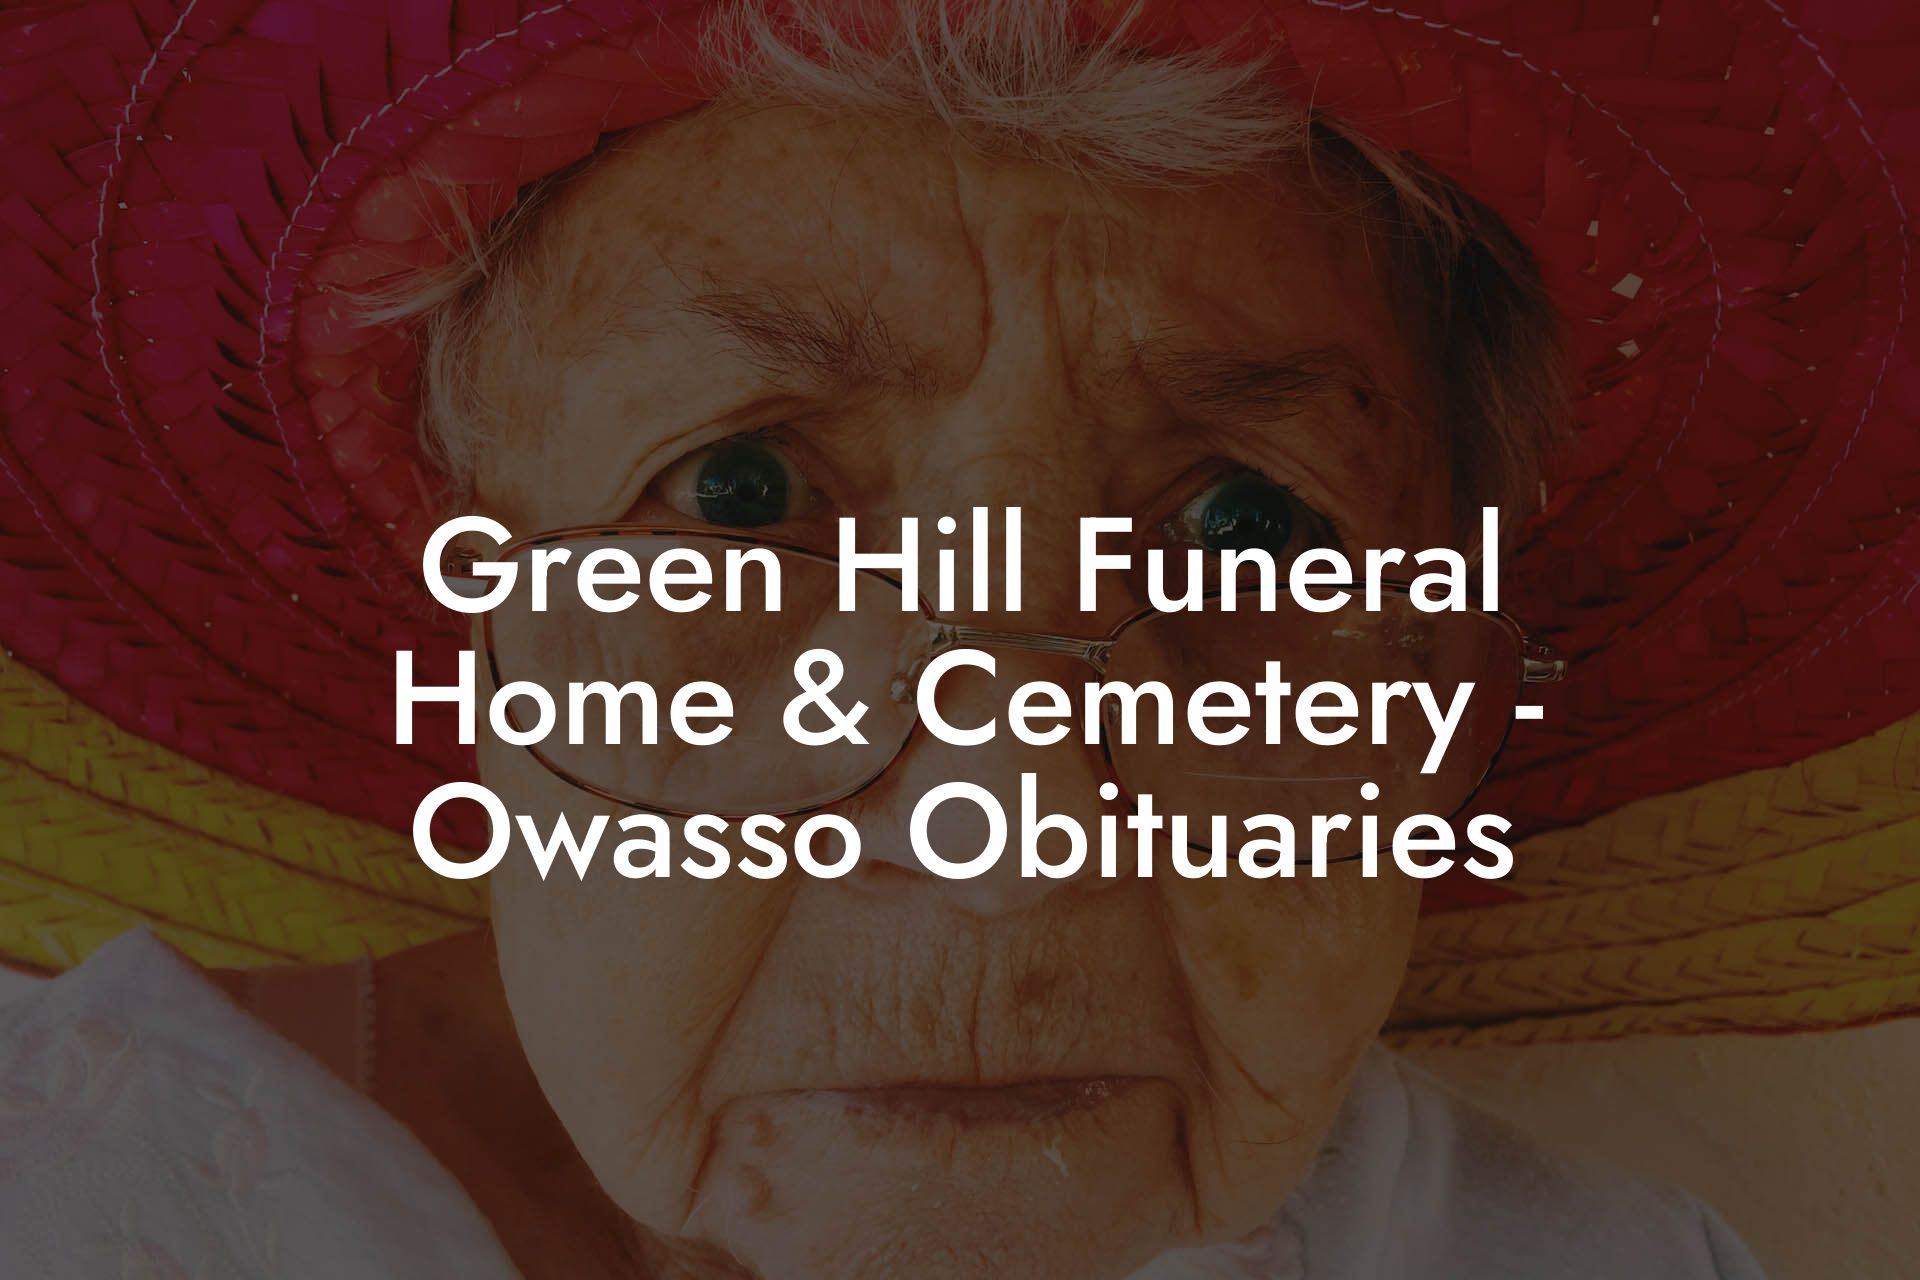 Green Hill Funeral Home & Cemetery - Owasso Obituaries